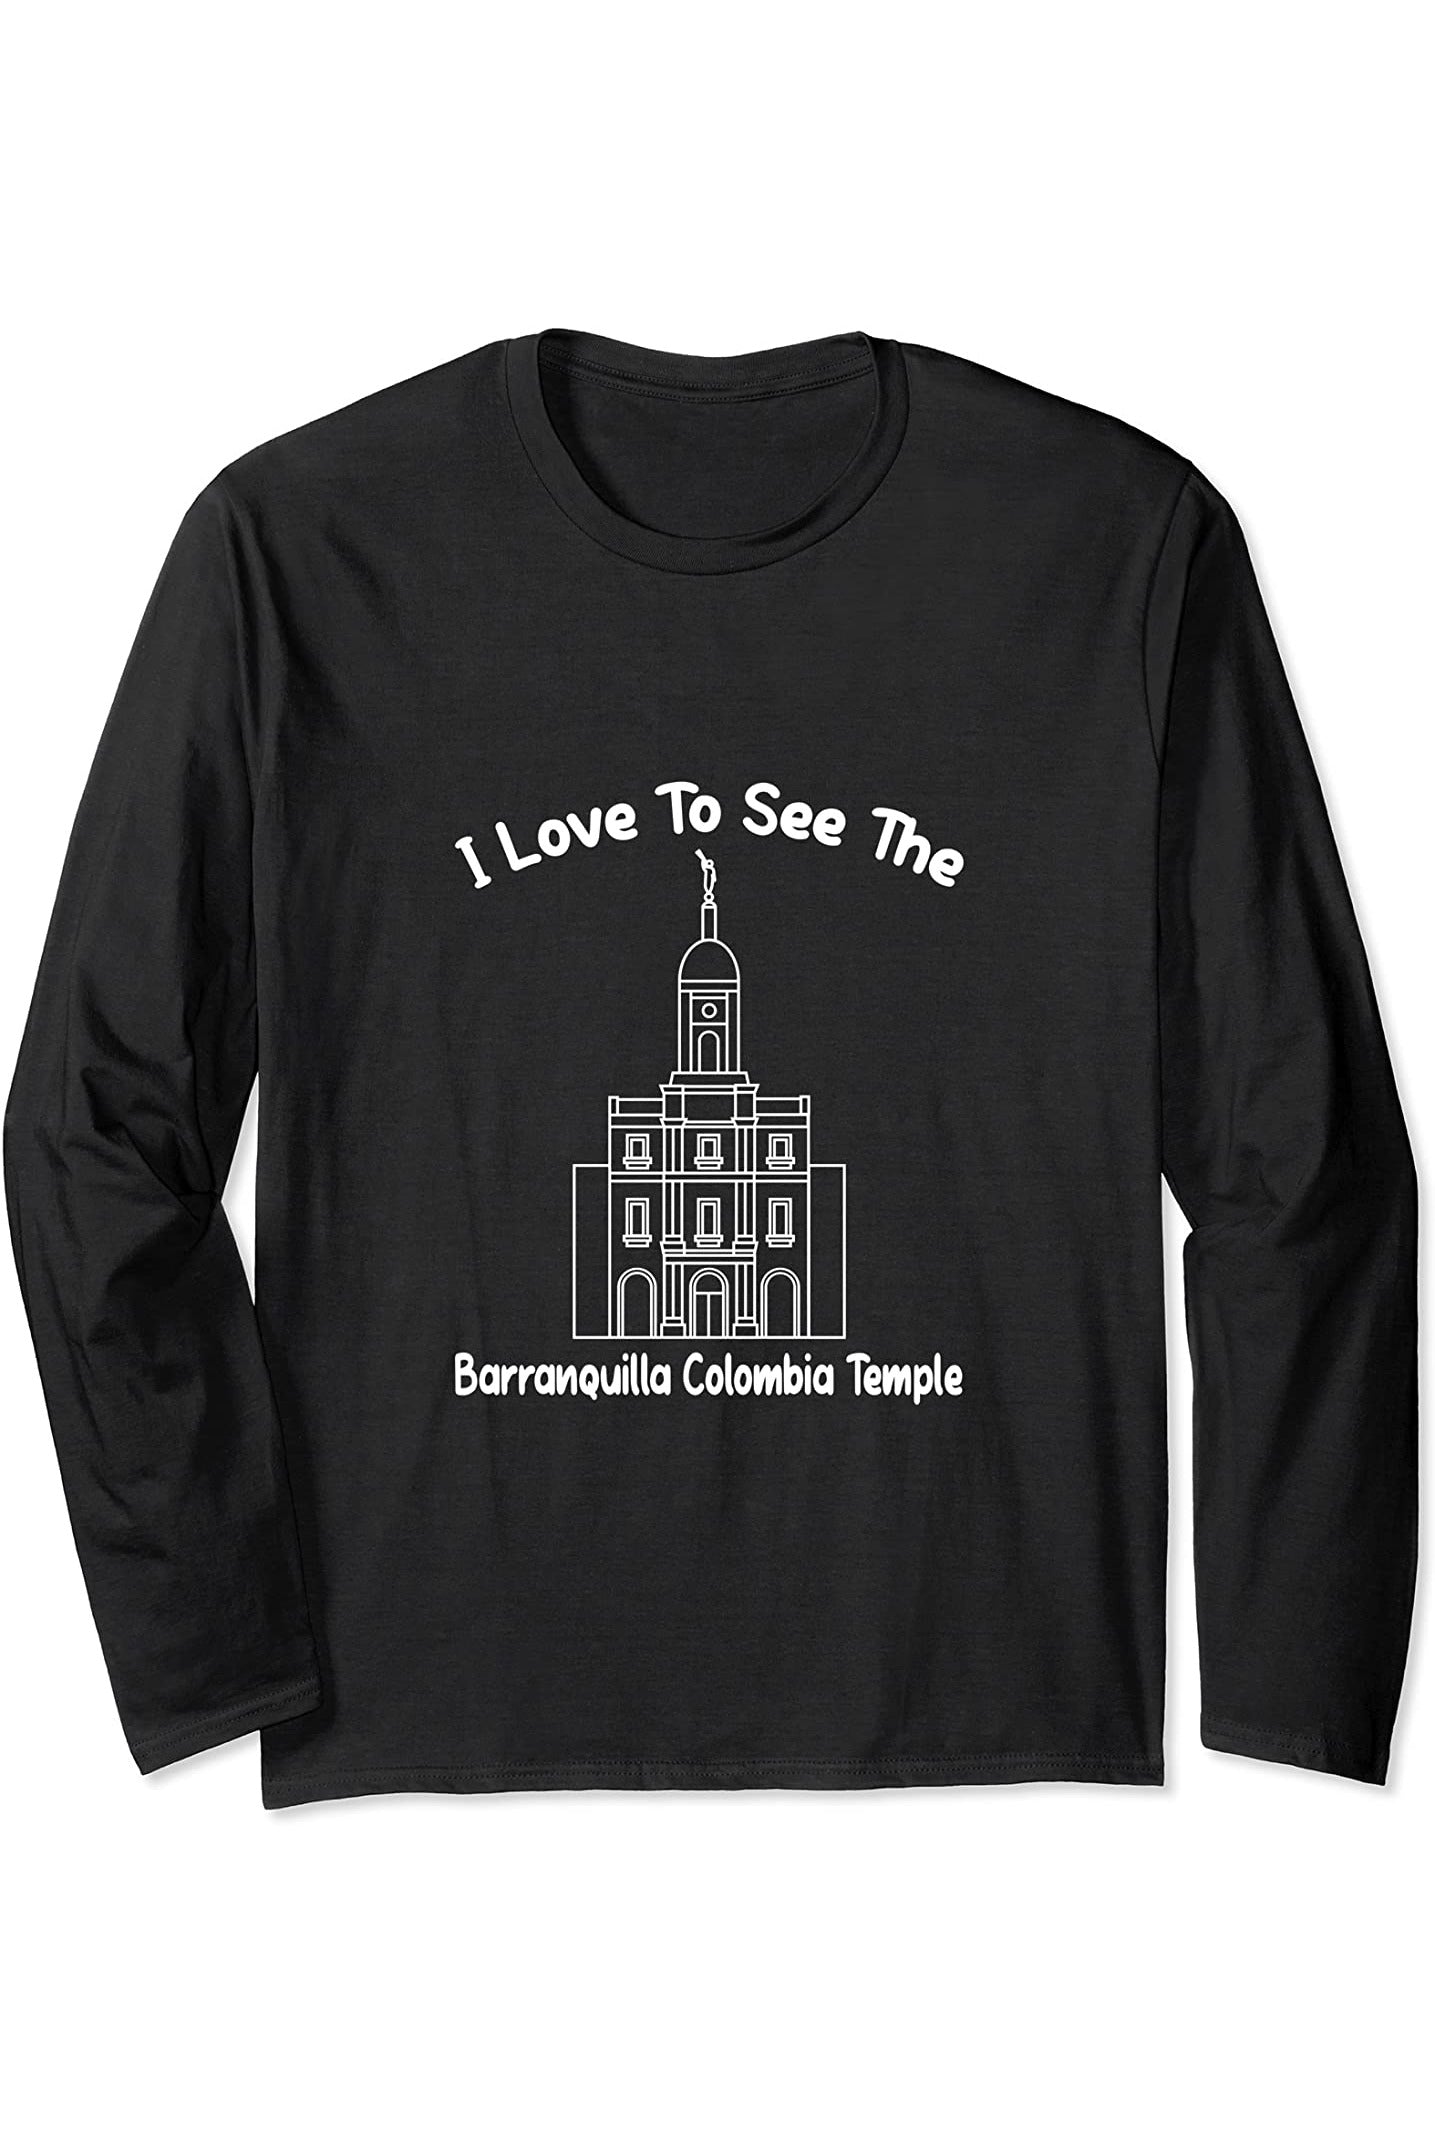 Barranquilla Colombia Temple Long Sleeve T-Shirt - Primary Style (English) US